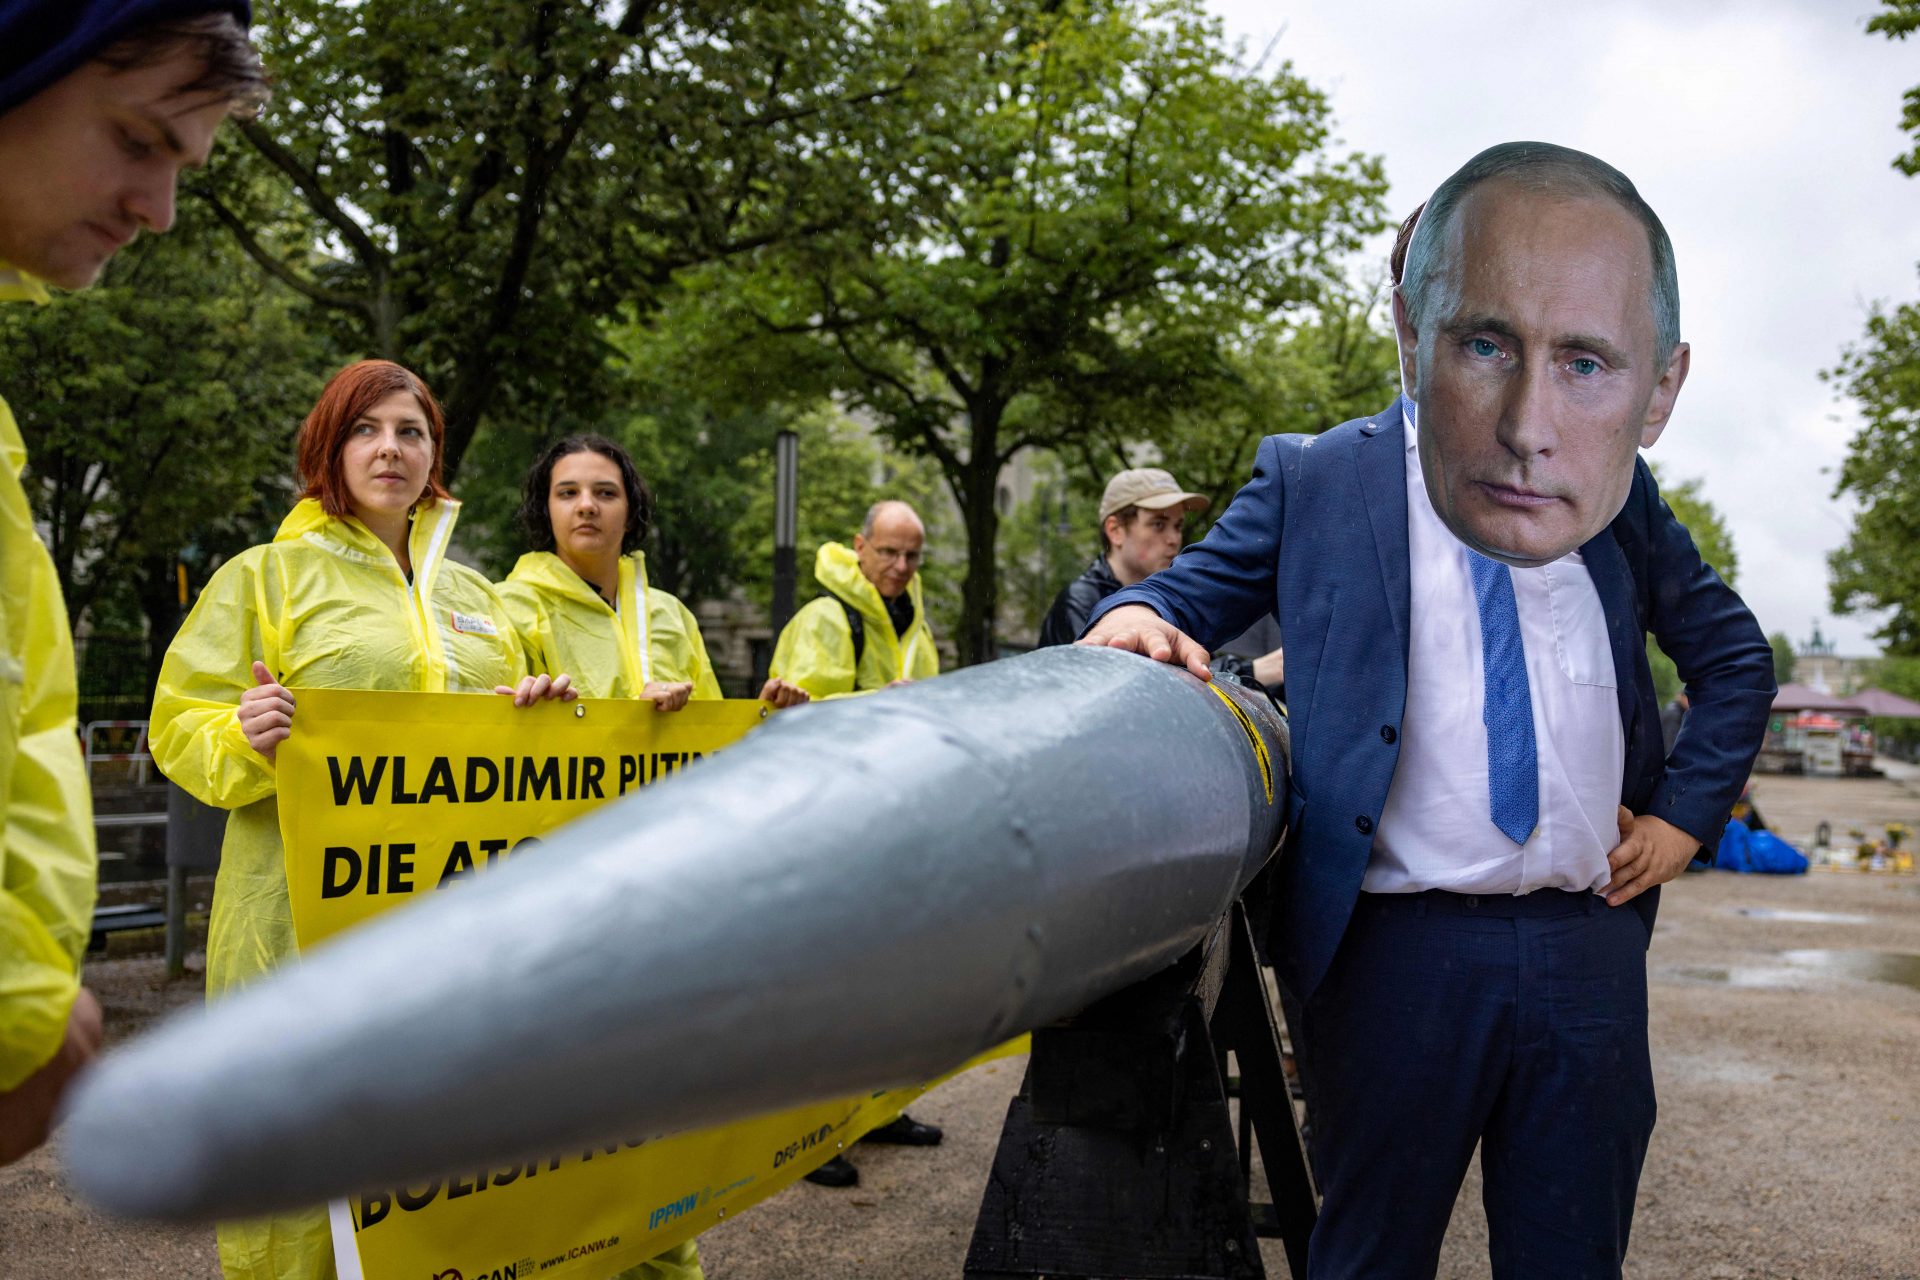 There are several reason Moscow might not chose the nuclear option